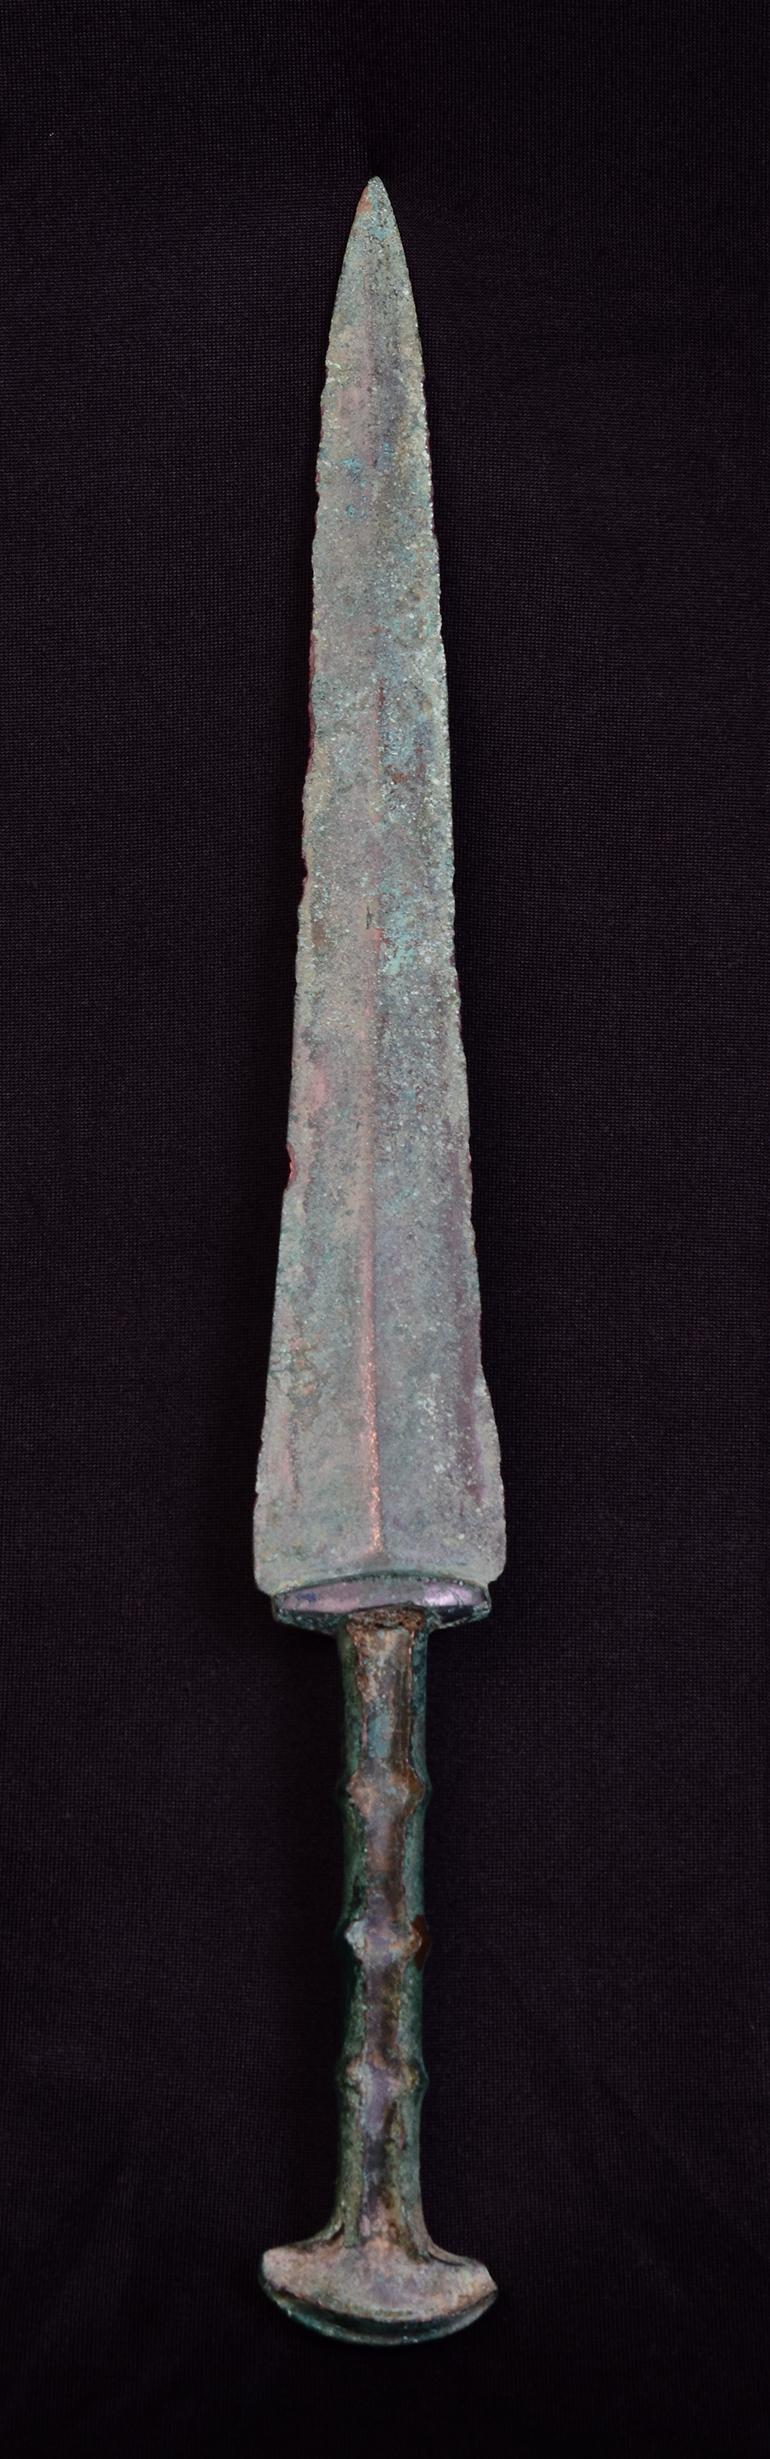 Ancient Antique Luristan Bronze Short Sword / Knife / Early Iron Age Weapon 2